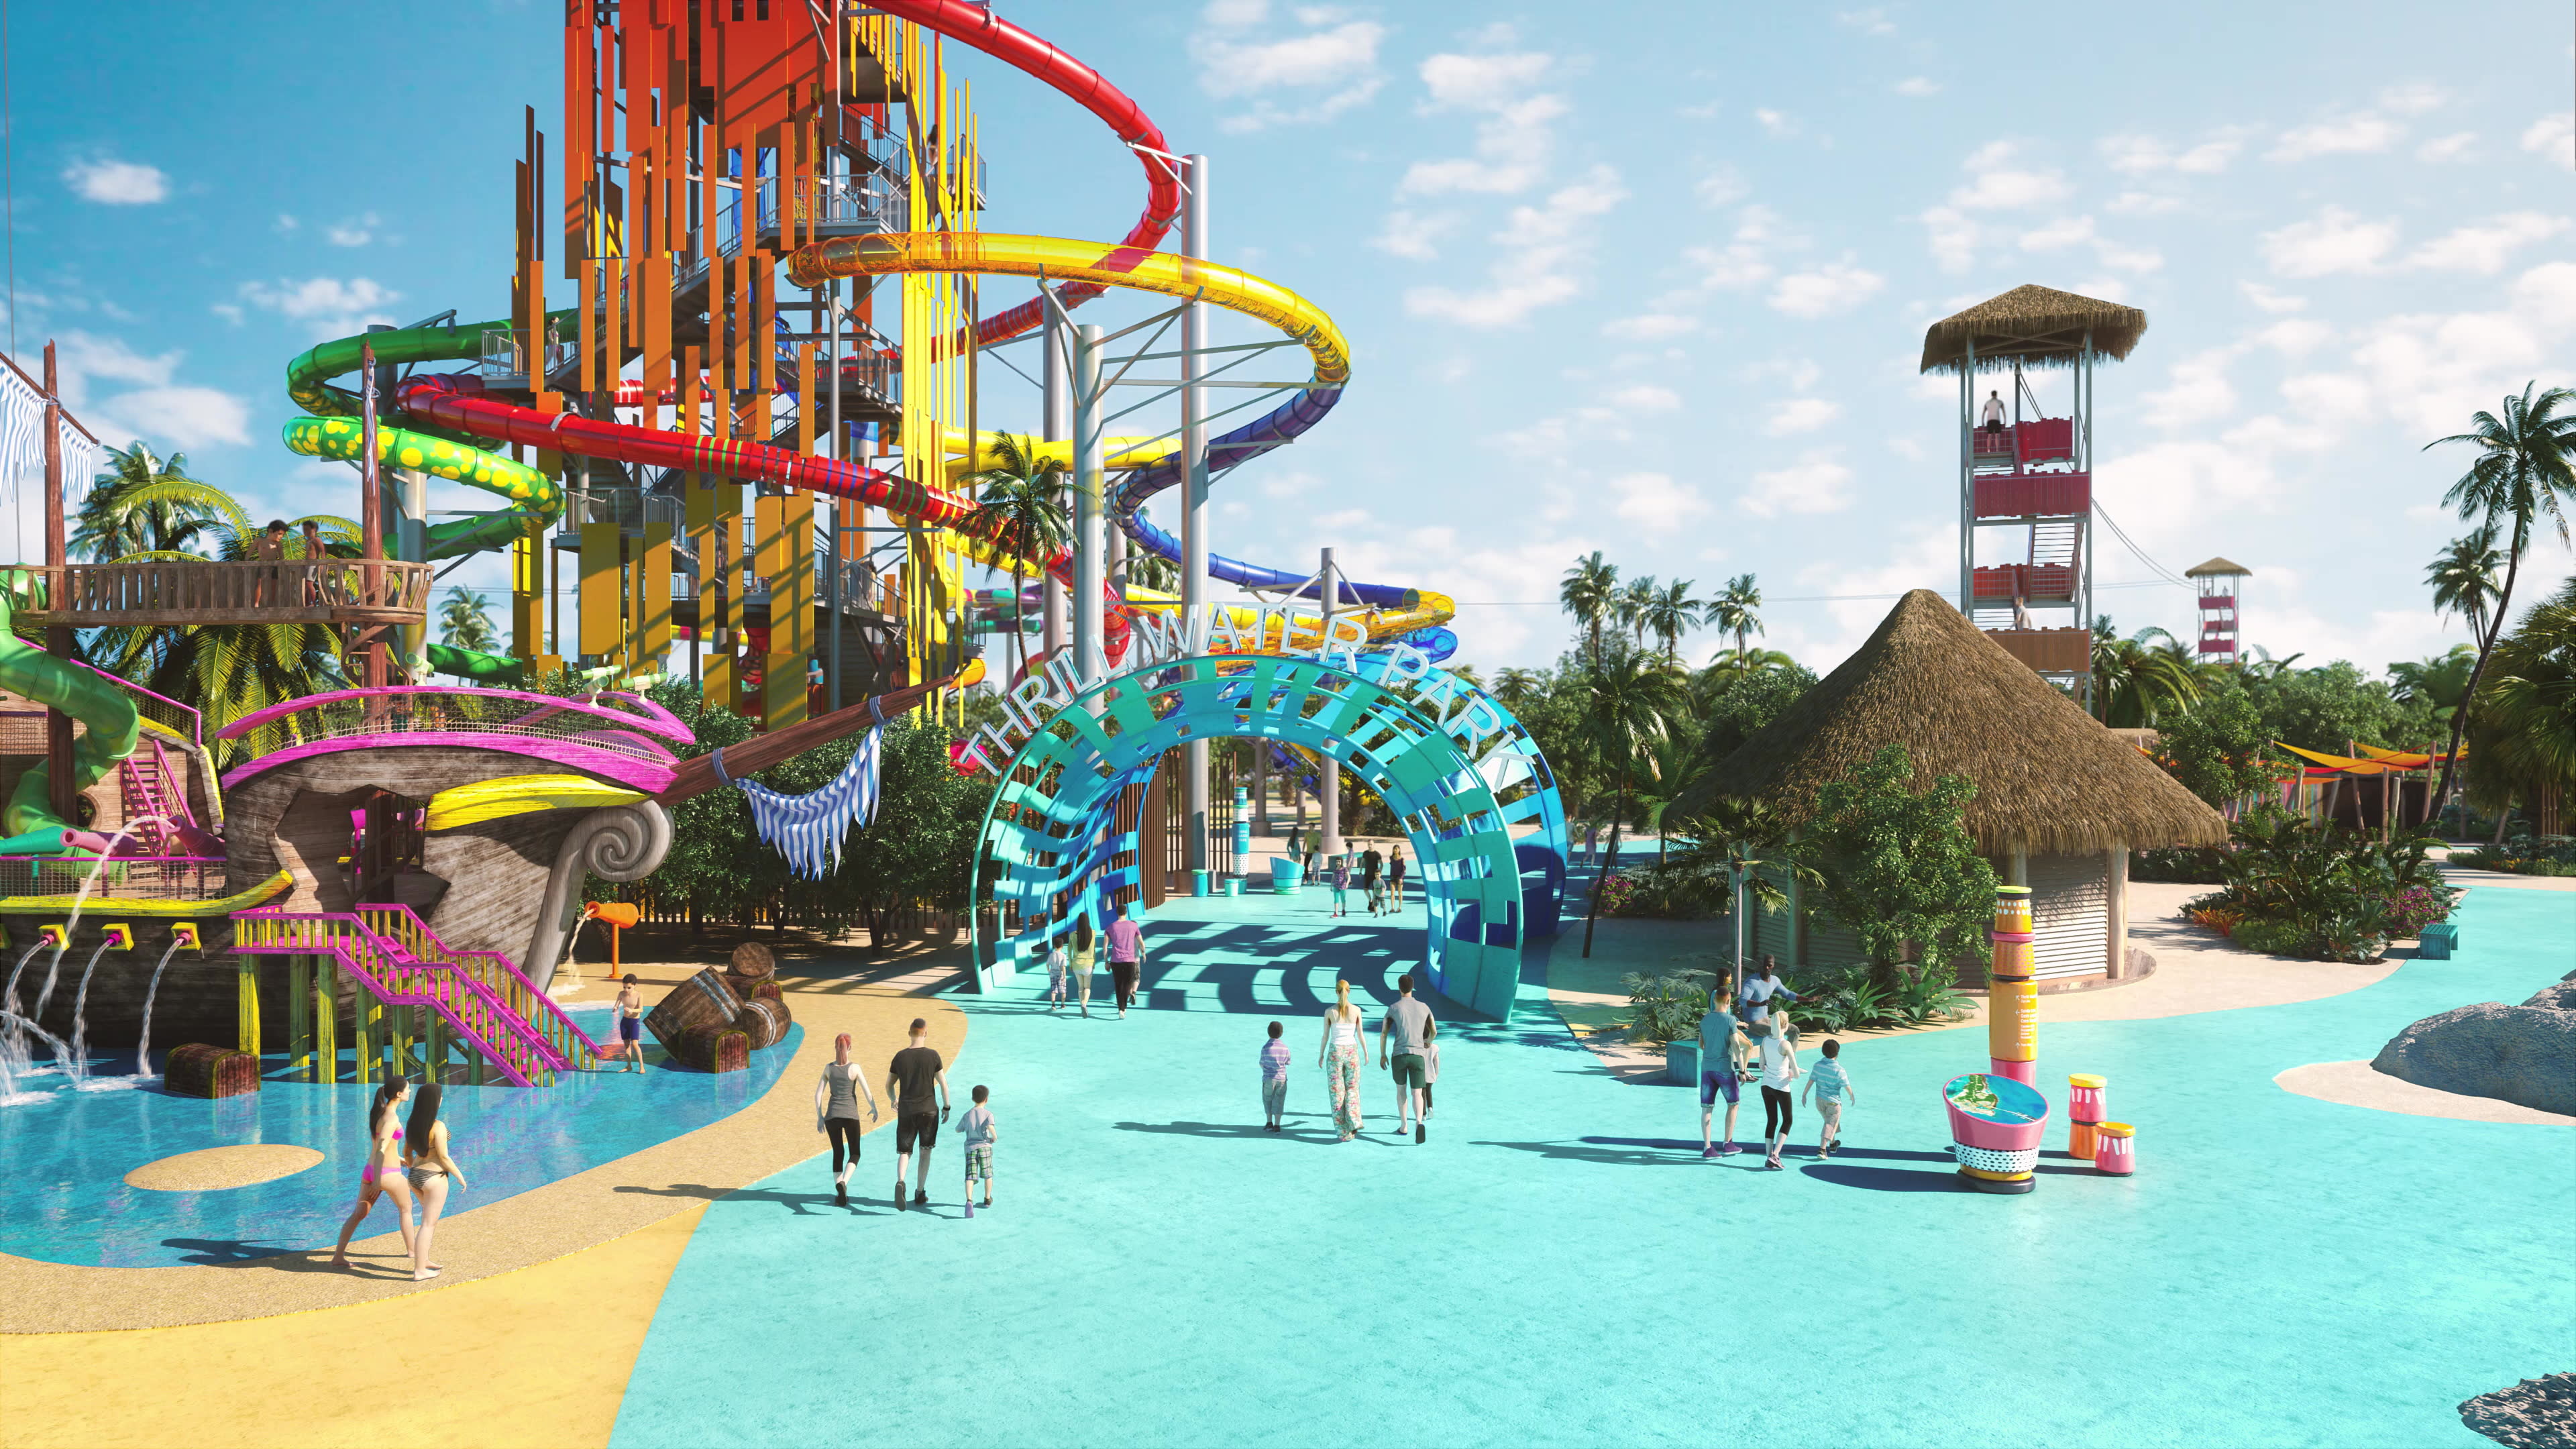 Waterpark: A funfair, featuring swimming pools, slides, fountains, or other attractions. 3840x2160 4K Background.